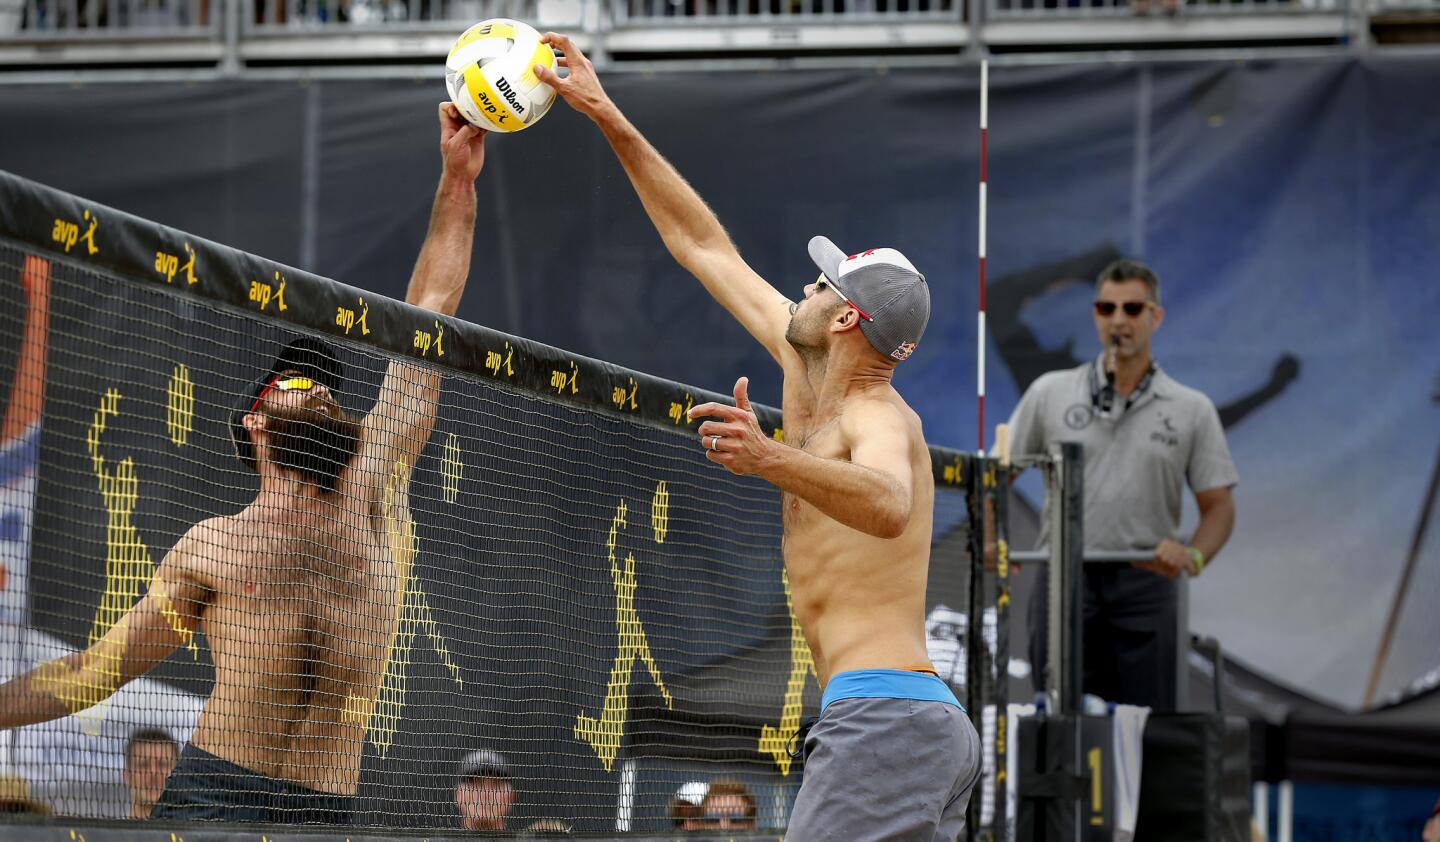 Phil Dalhousser, right, and Maddison McKibbin battle for a tip during the opening round of the Huntington Beach Open. Dalhausser and teammate Nick Lucena defeated the McKibbin brothers.